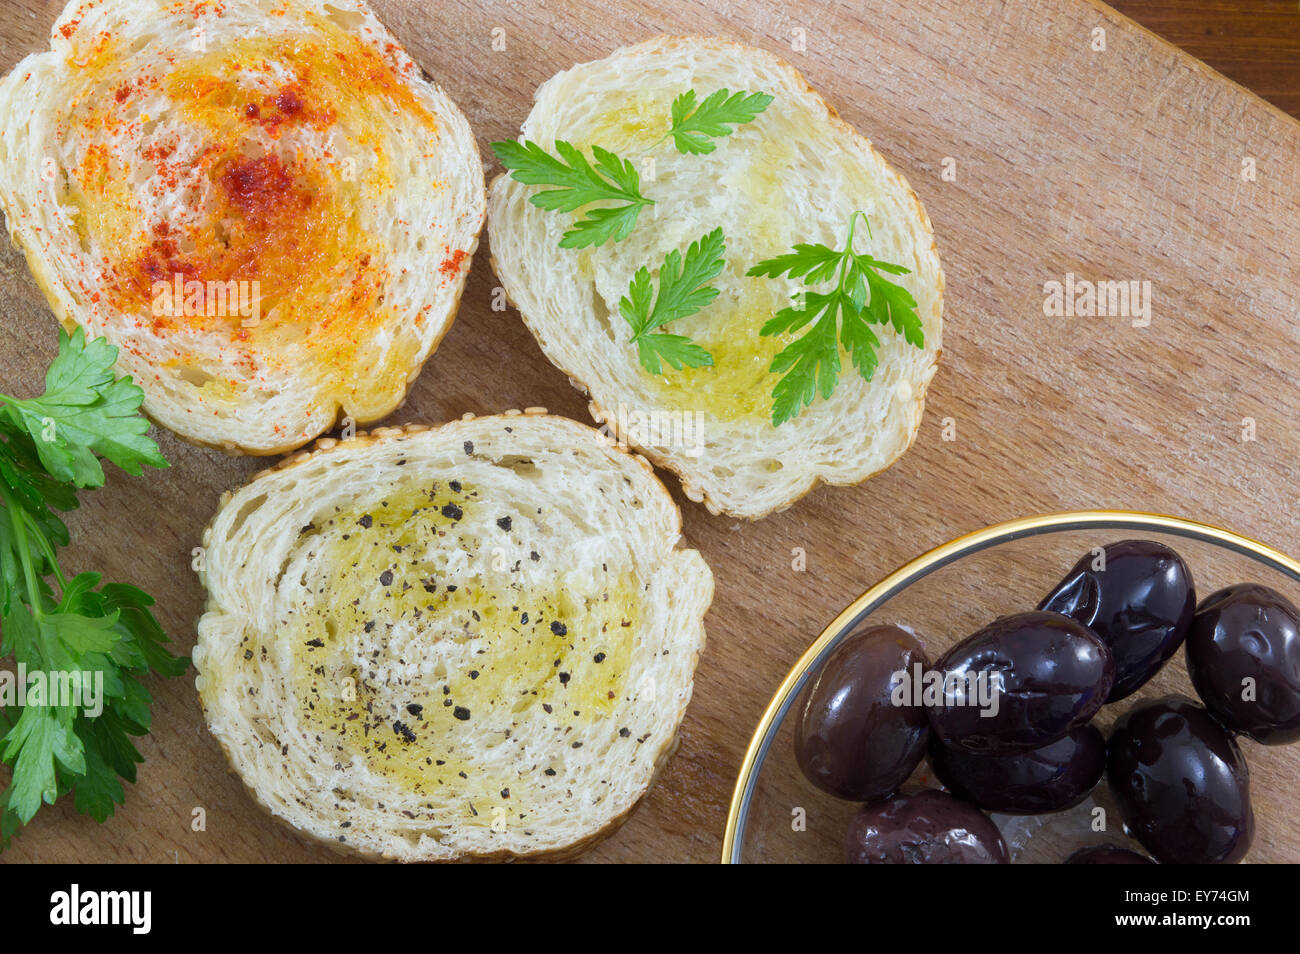 Vegetarian sandwich snack on the table Stock Photo